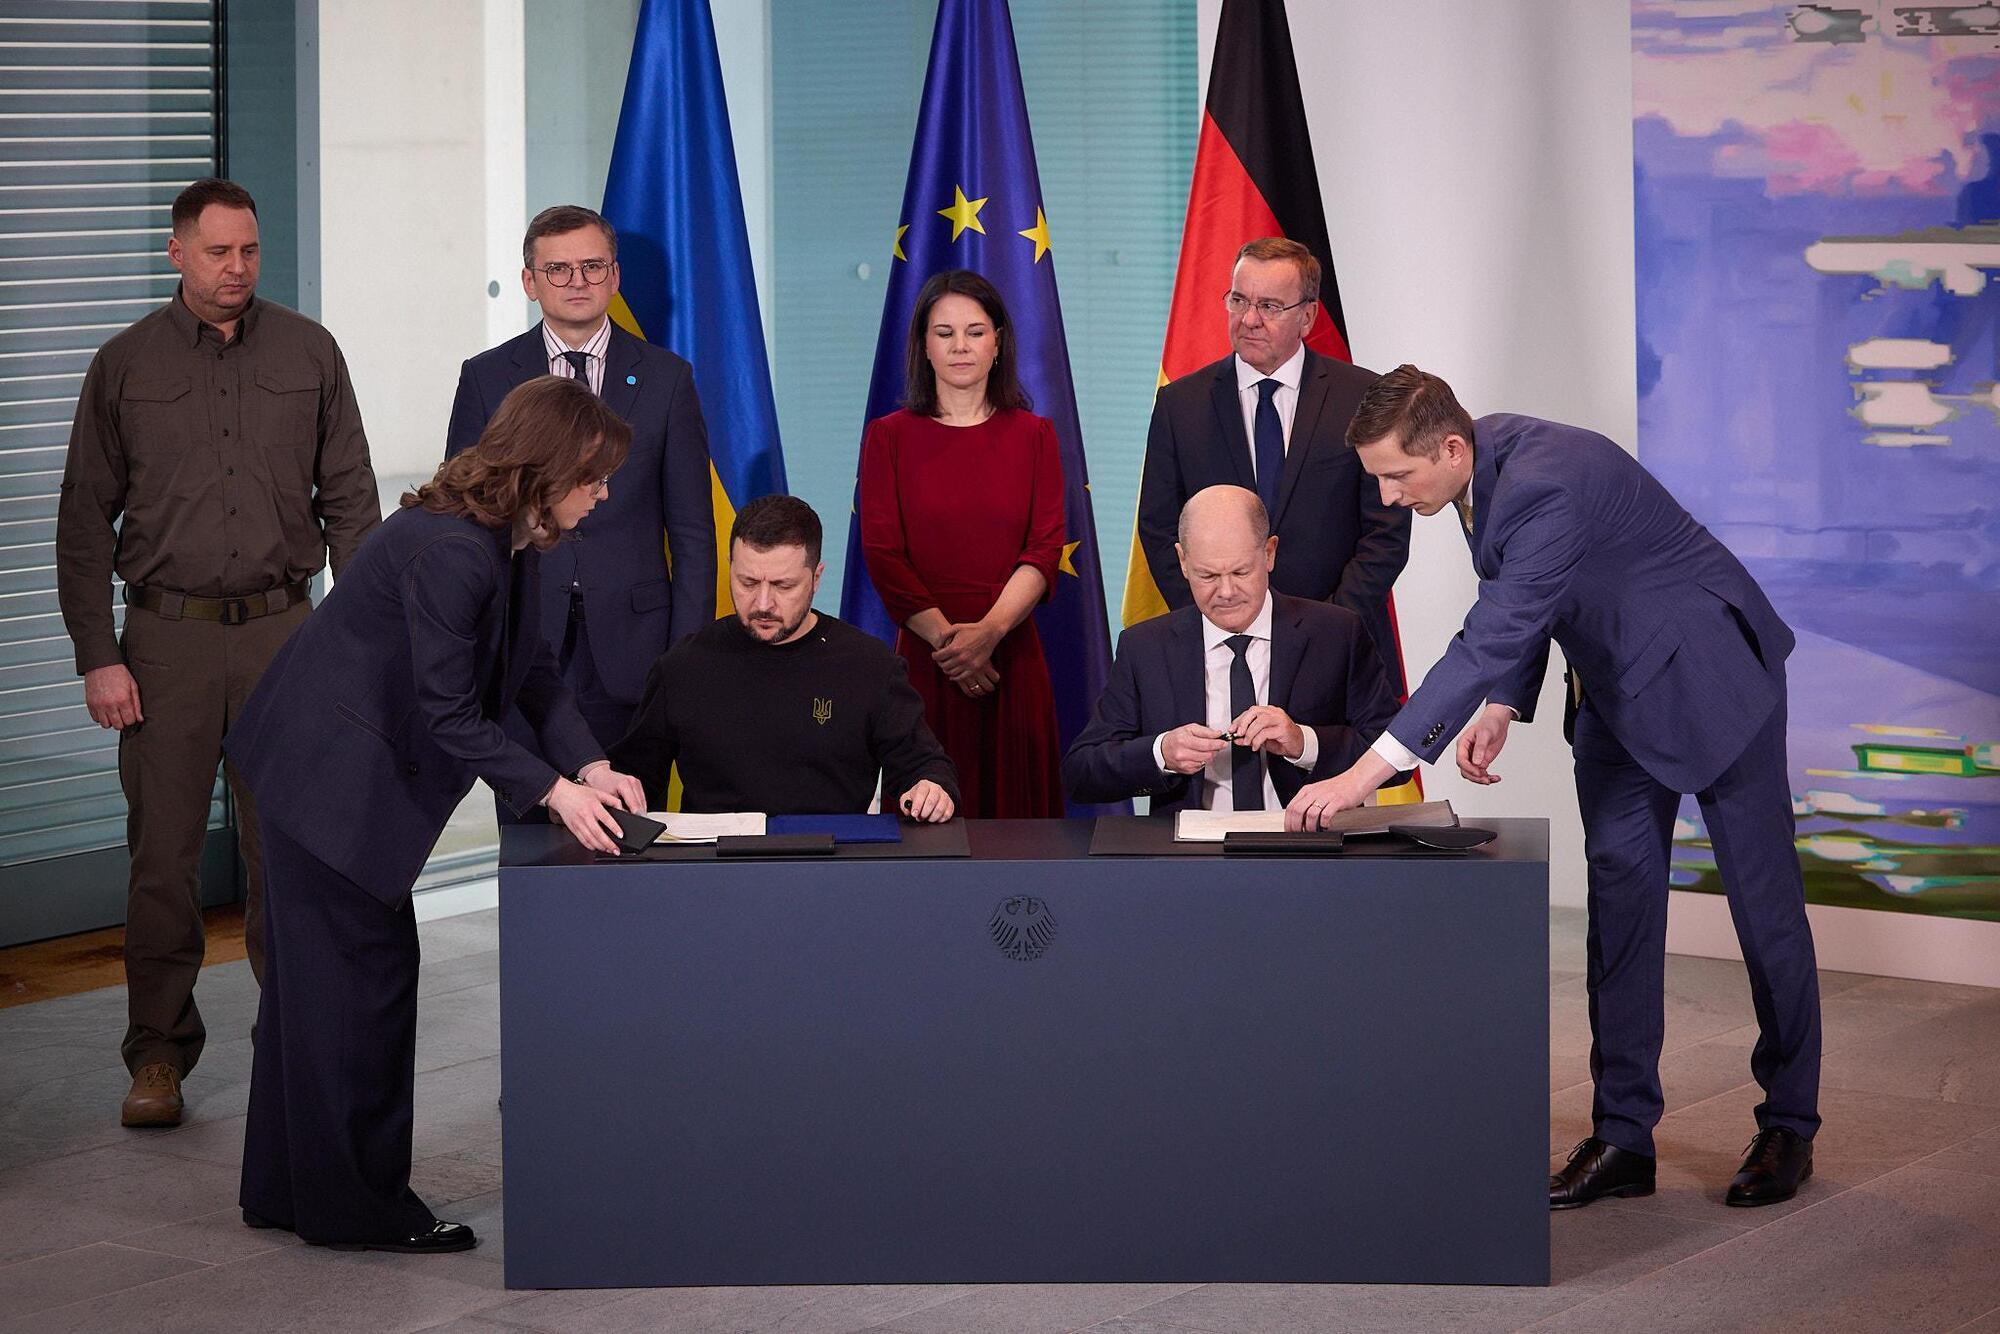 Signing of bilateral security agreement between Ukraine and Germany